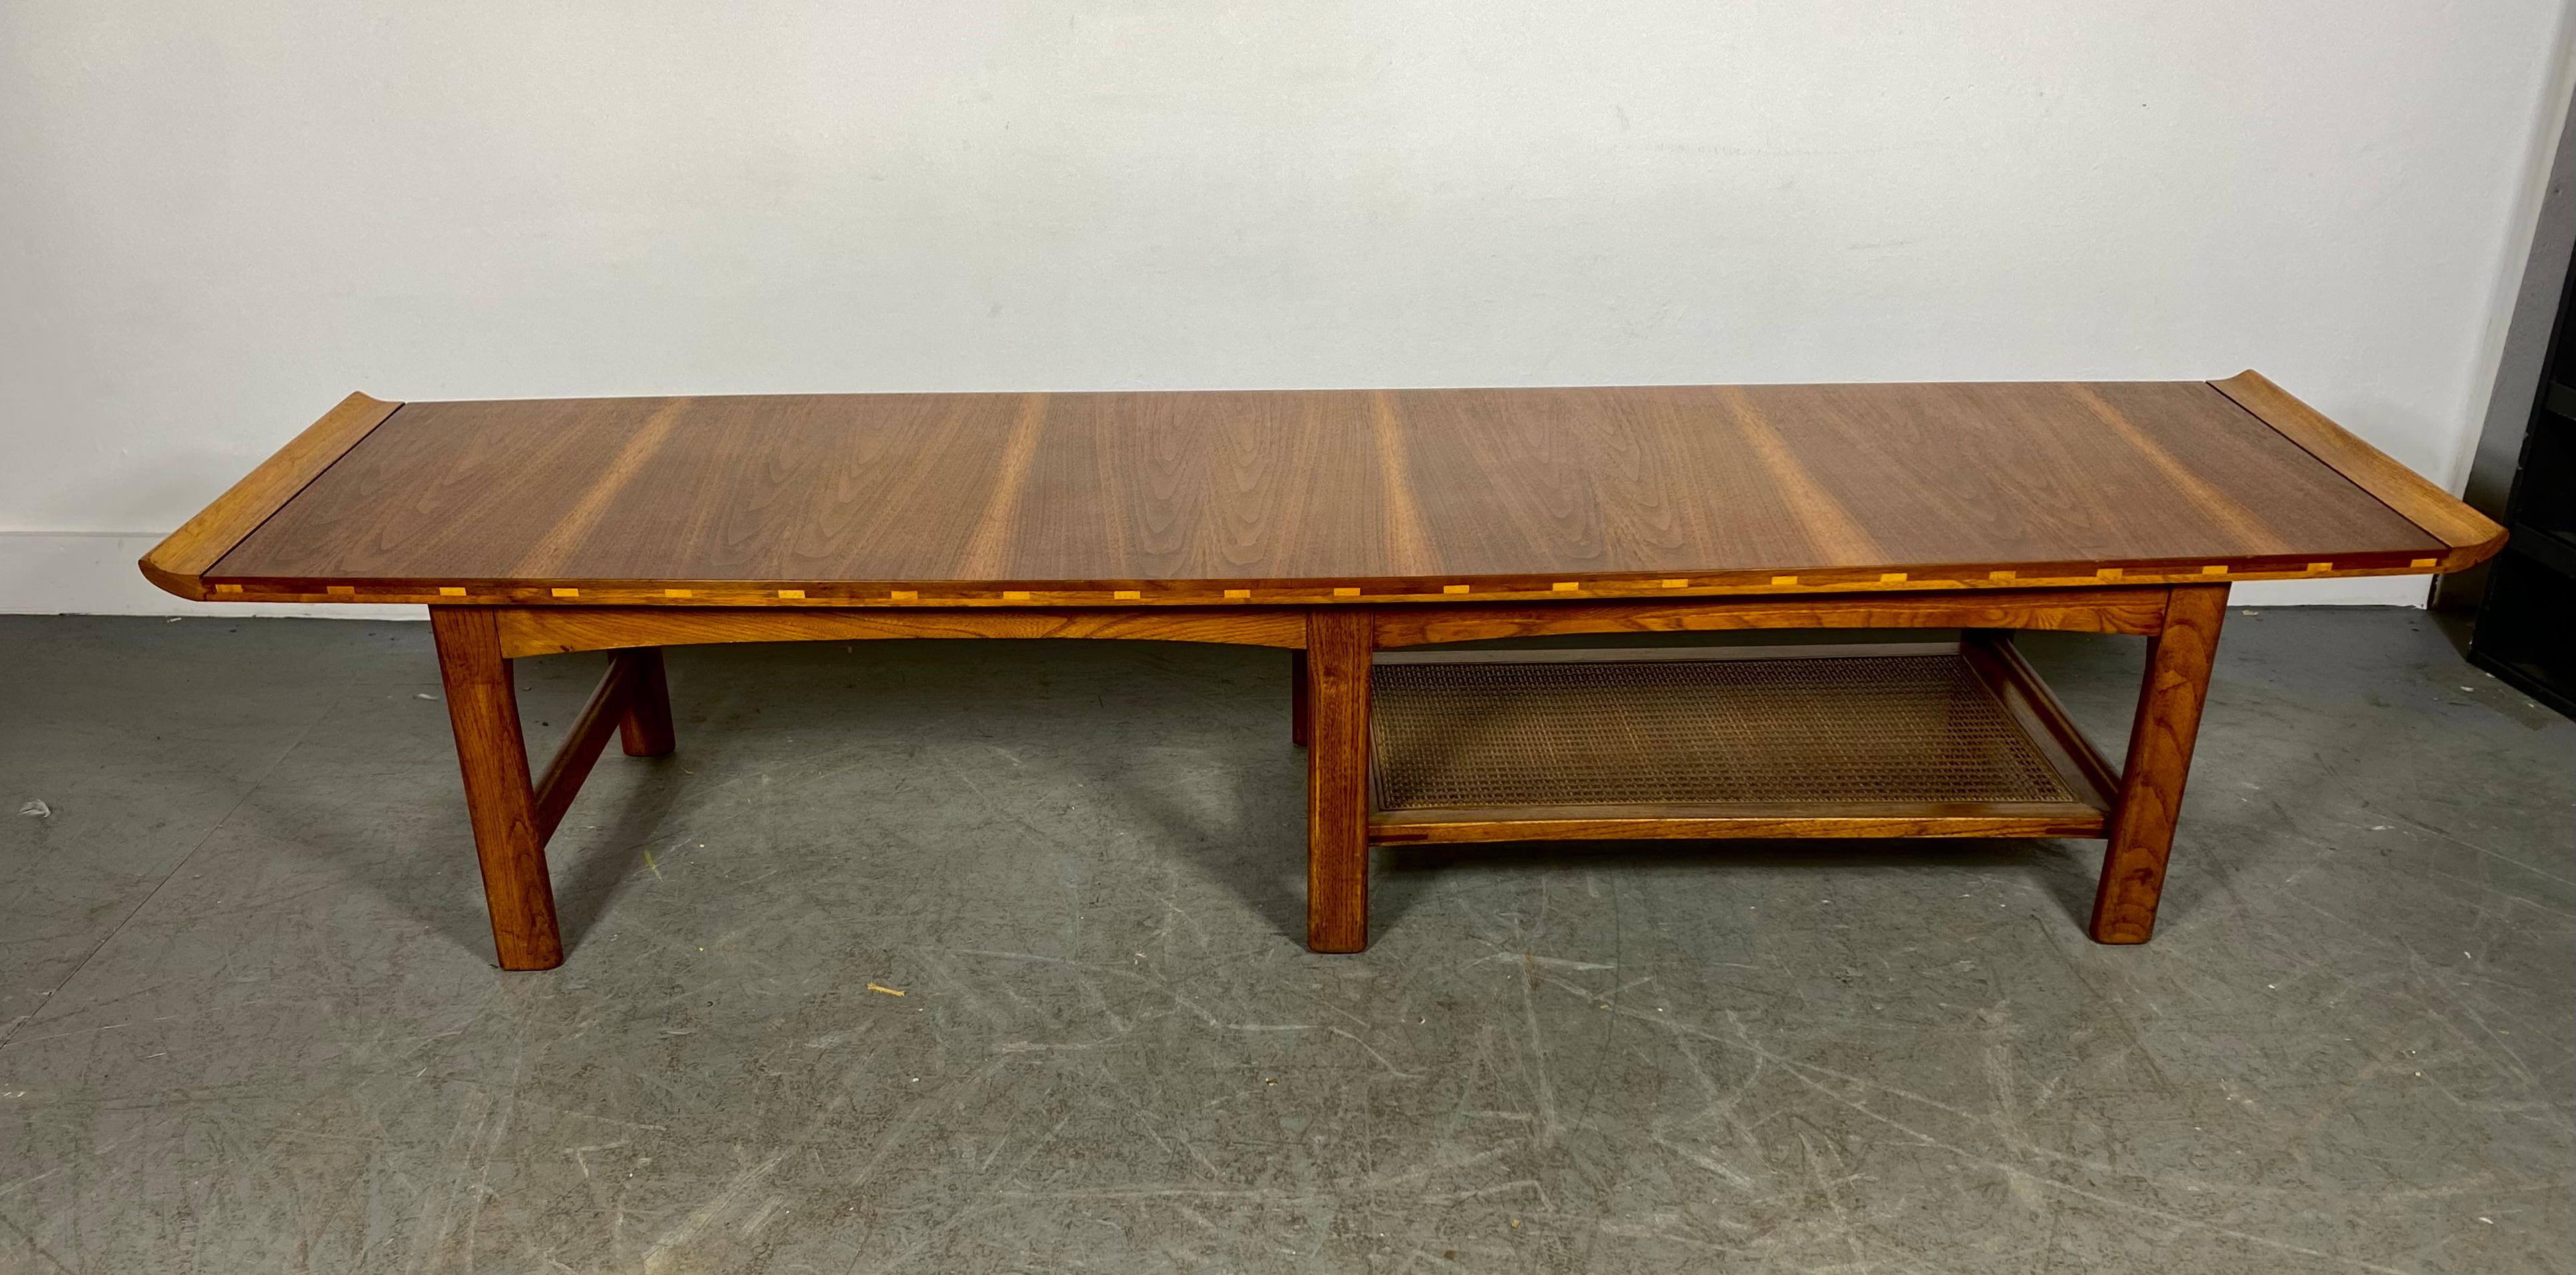  Classic Modernist, Mid Century Coffee / Cocktail table (long-john) Amazing Figured Walnut with birch or maple dove-tail detail edge and basket weave lower shelf. 
 Wonderful design..curved edges,Hand delivery avail to New York City or anywhere en